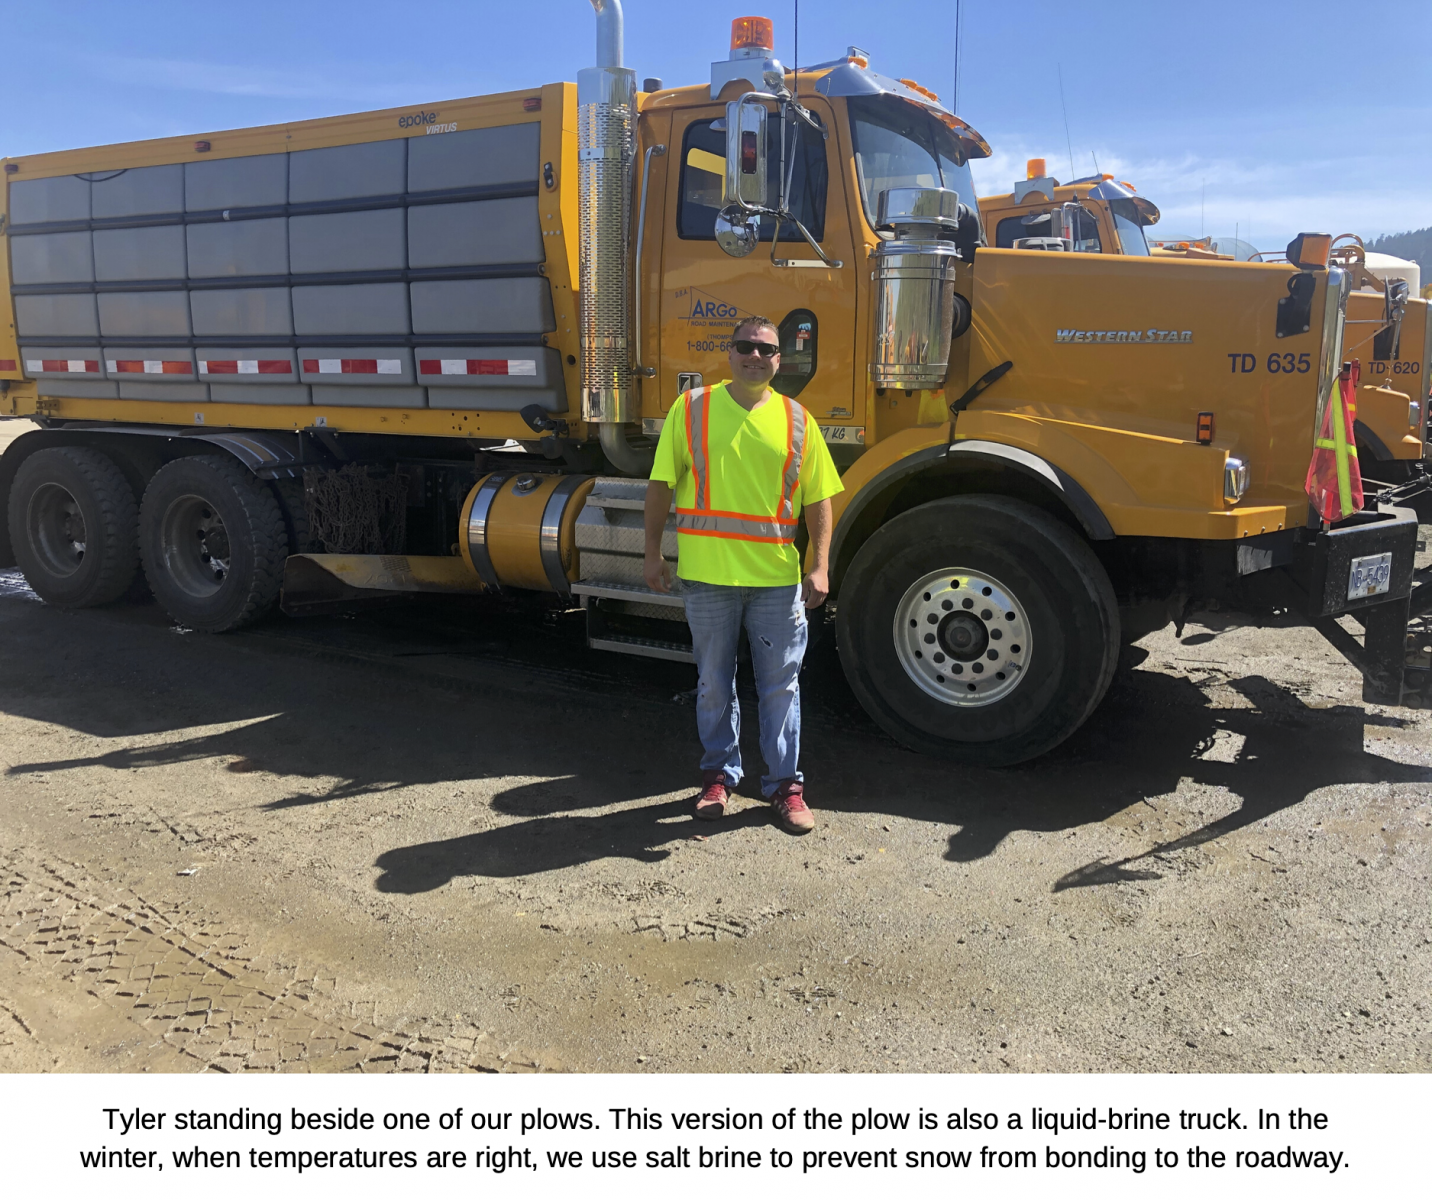 Tyler standing beside one of our plows. This version of the plow is also a liquid brine truck. In the winter, when temperatures are right, we use salt brine to prevent snow from bonding to the roadway.